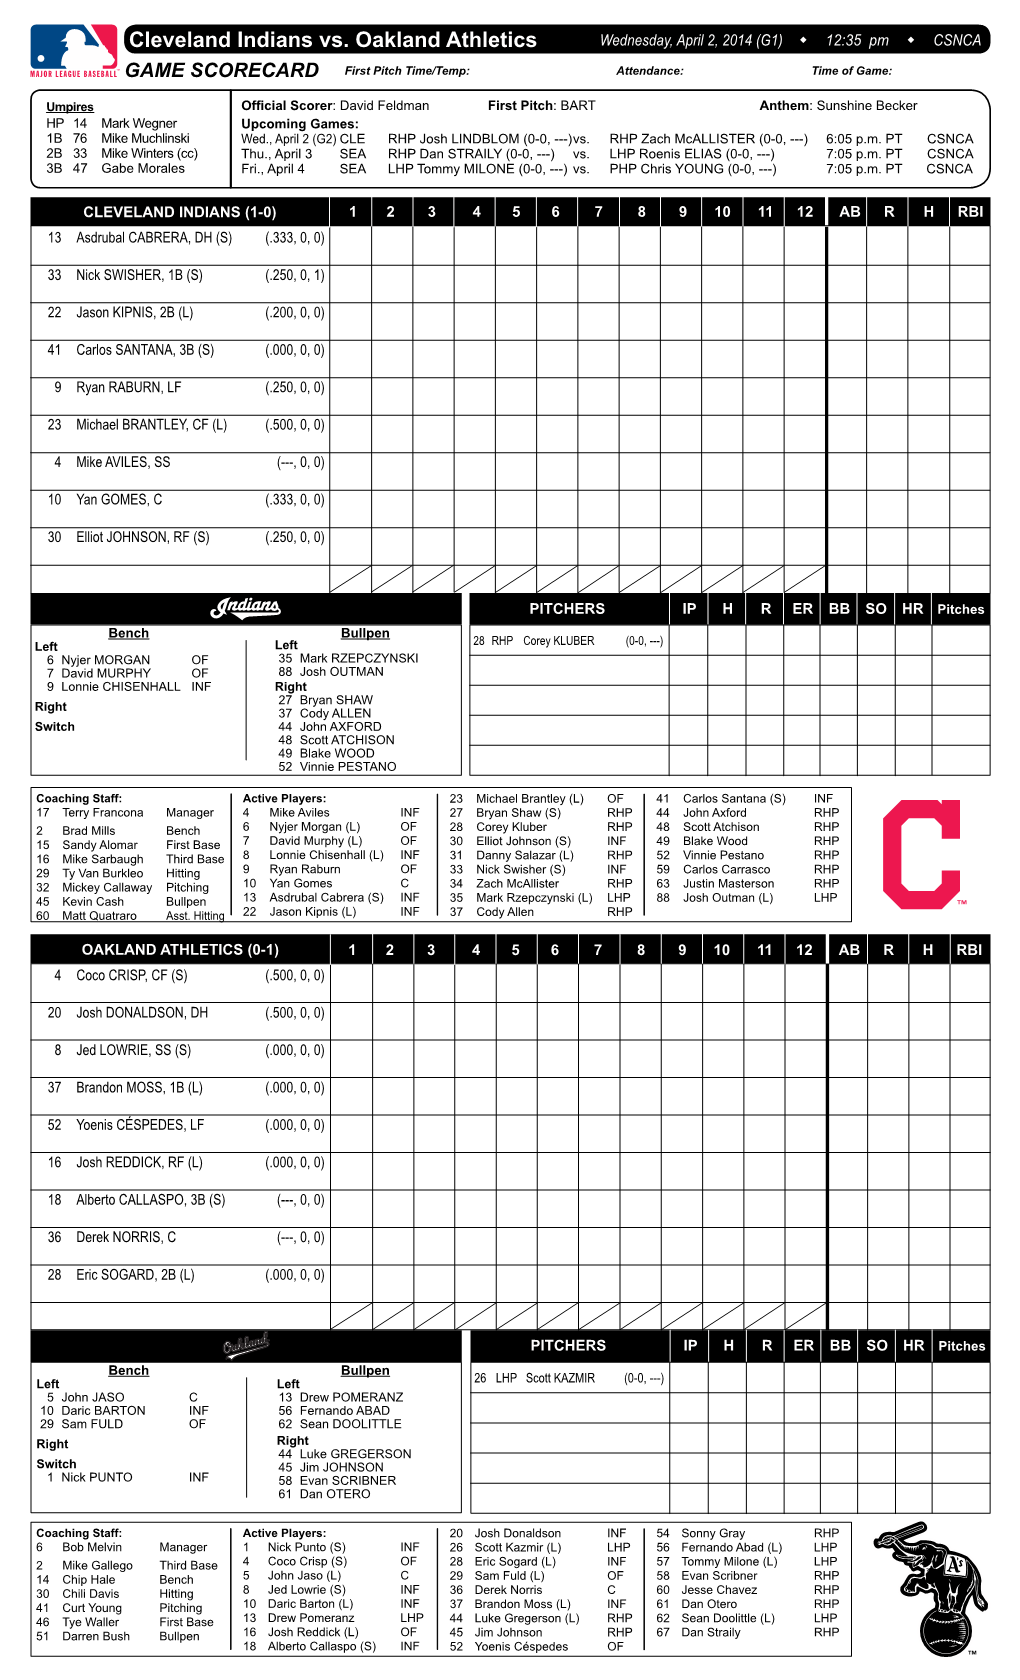 Cleveland Indians Vs. Oakland Athletics Wednesday, April 2, 2014 (G1) W 12:35 Pm W CSNCA GAME SCORECARD First Pitch Time/Temp: Attendance: Time of Game